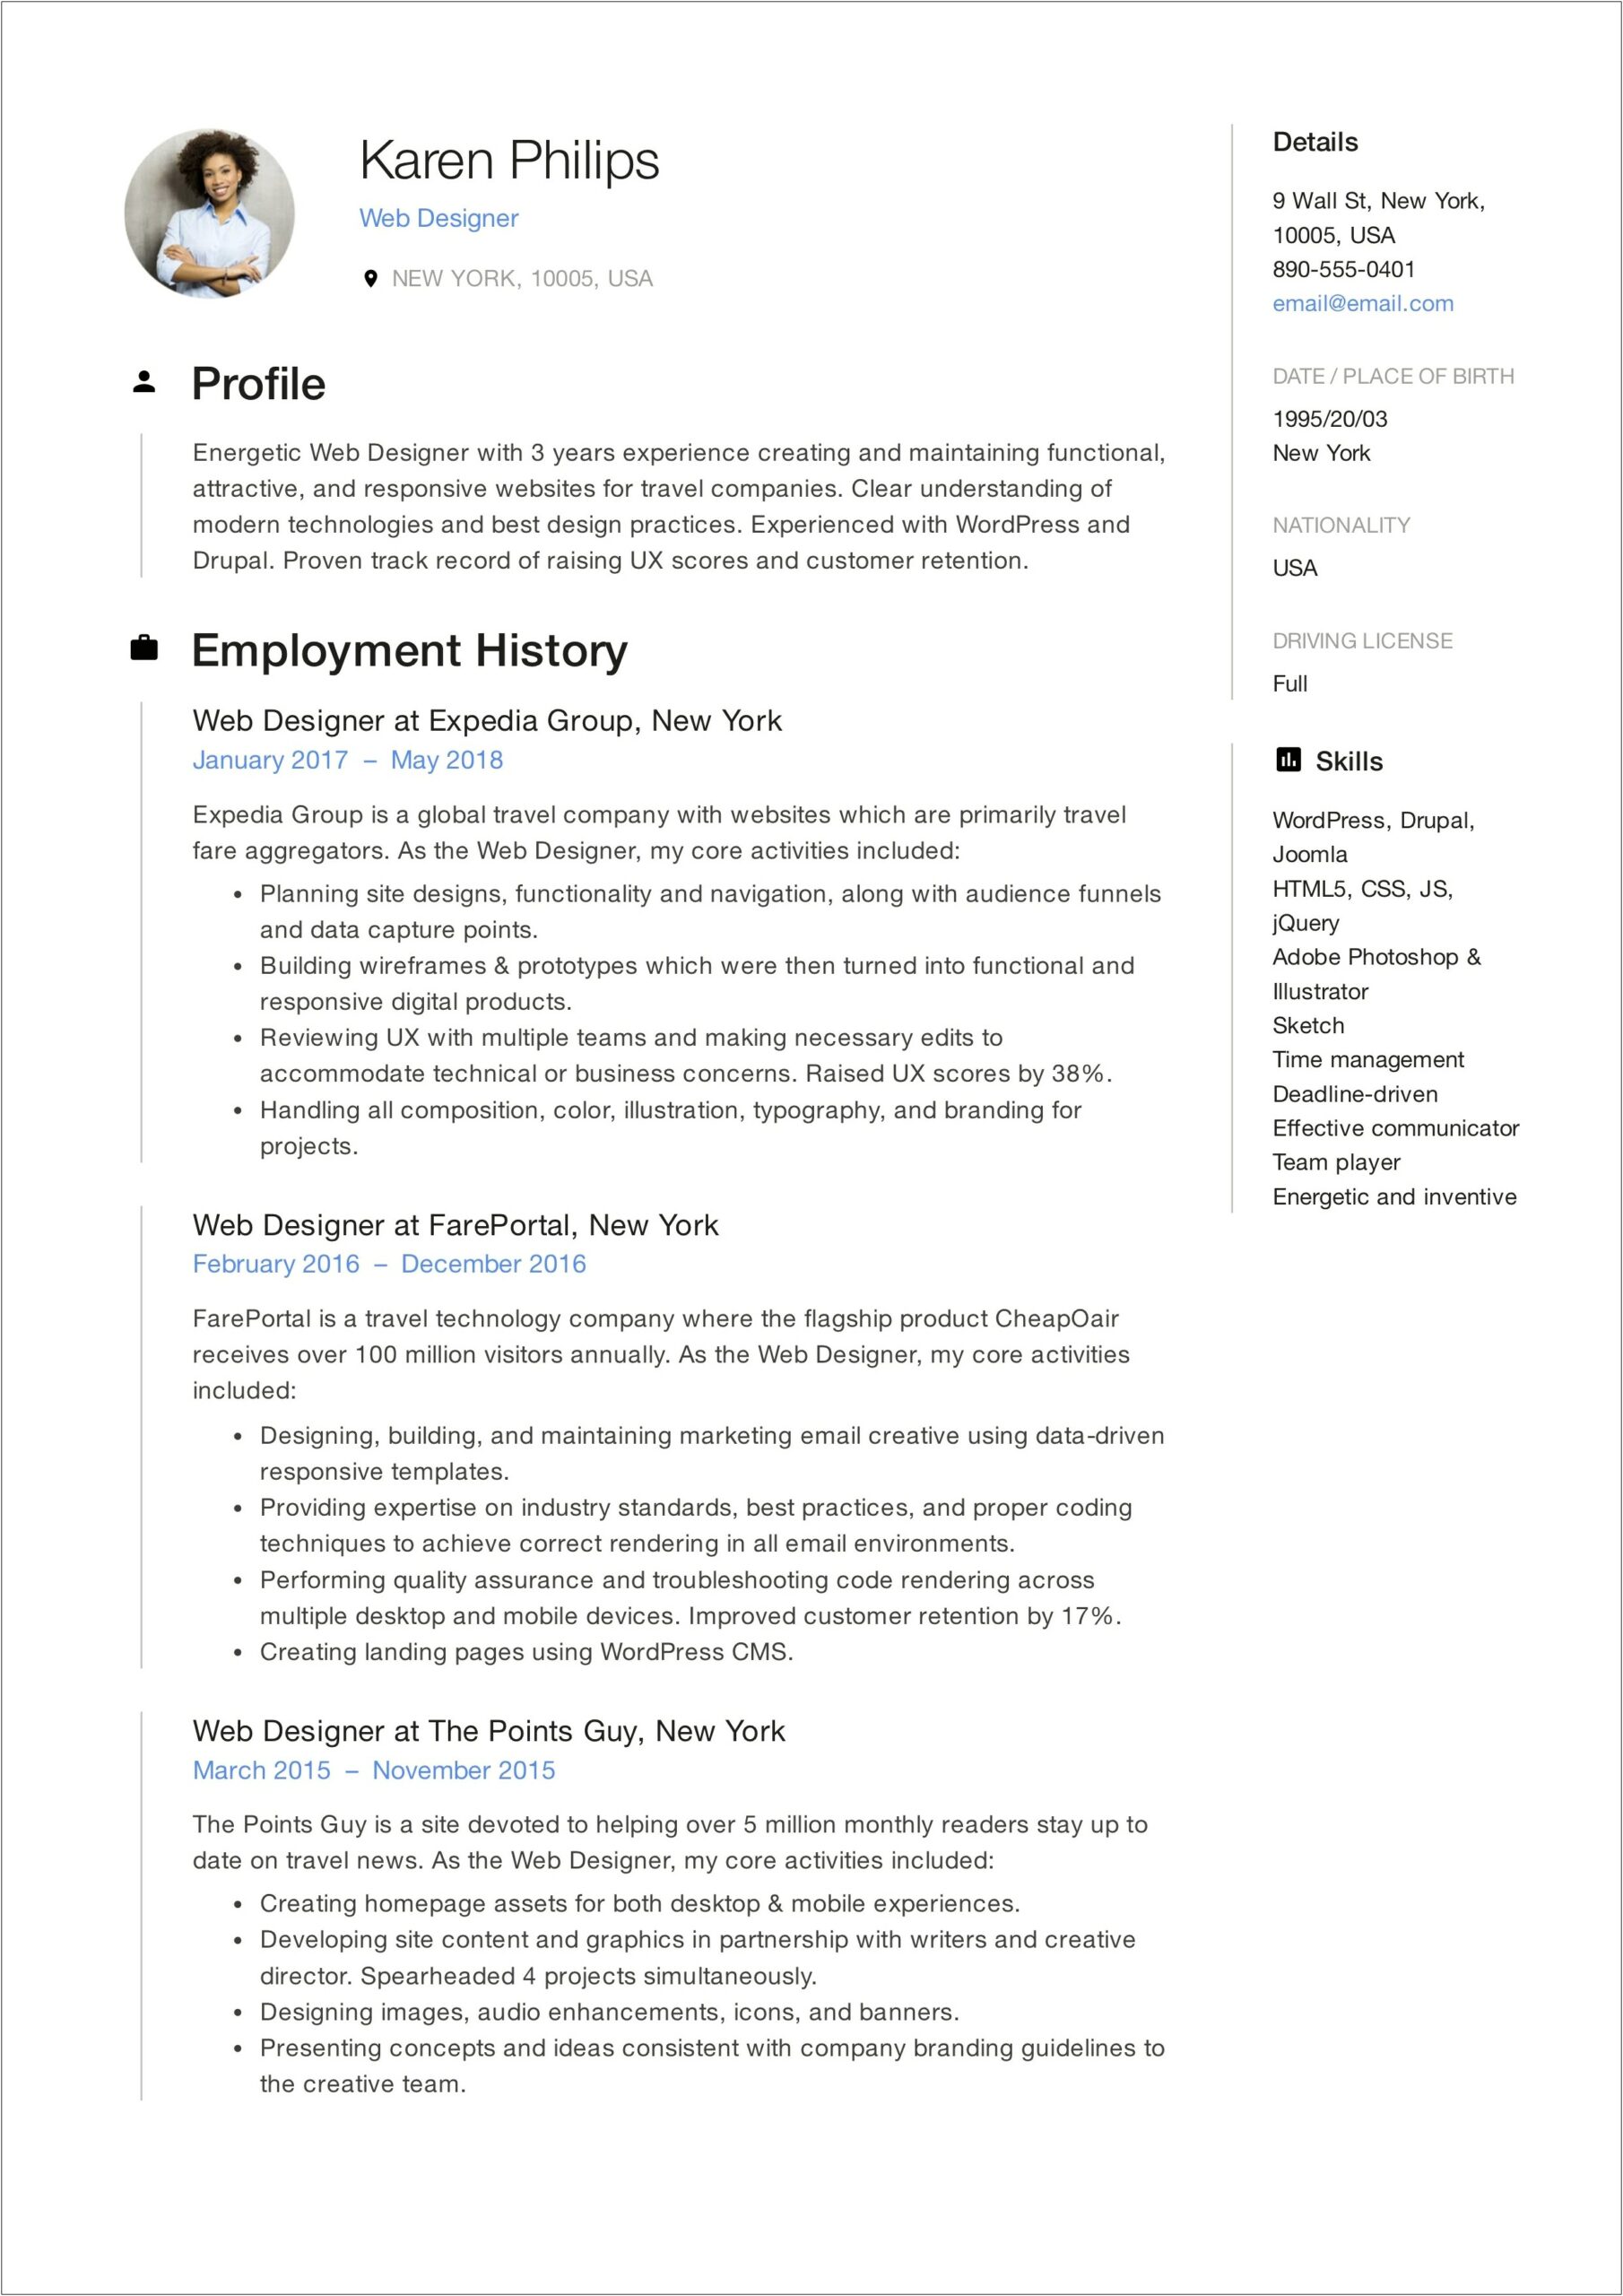 Best Web Based Application To Put On Resume